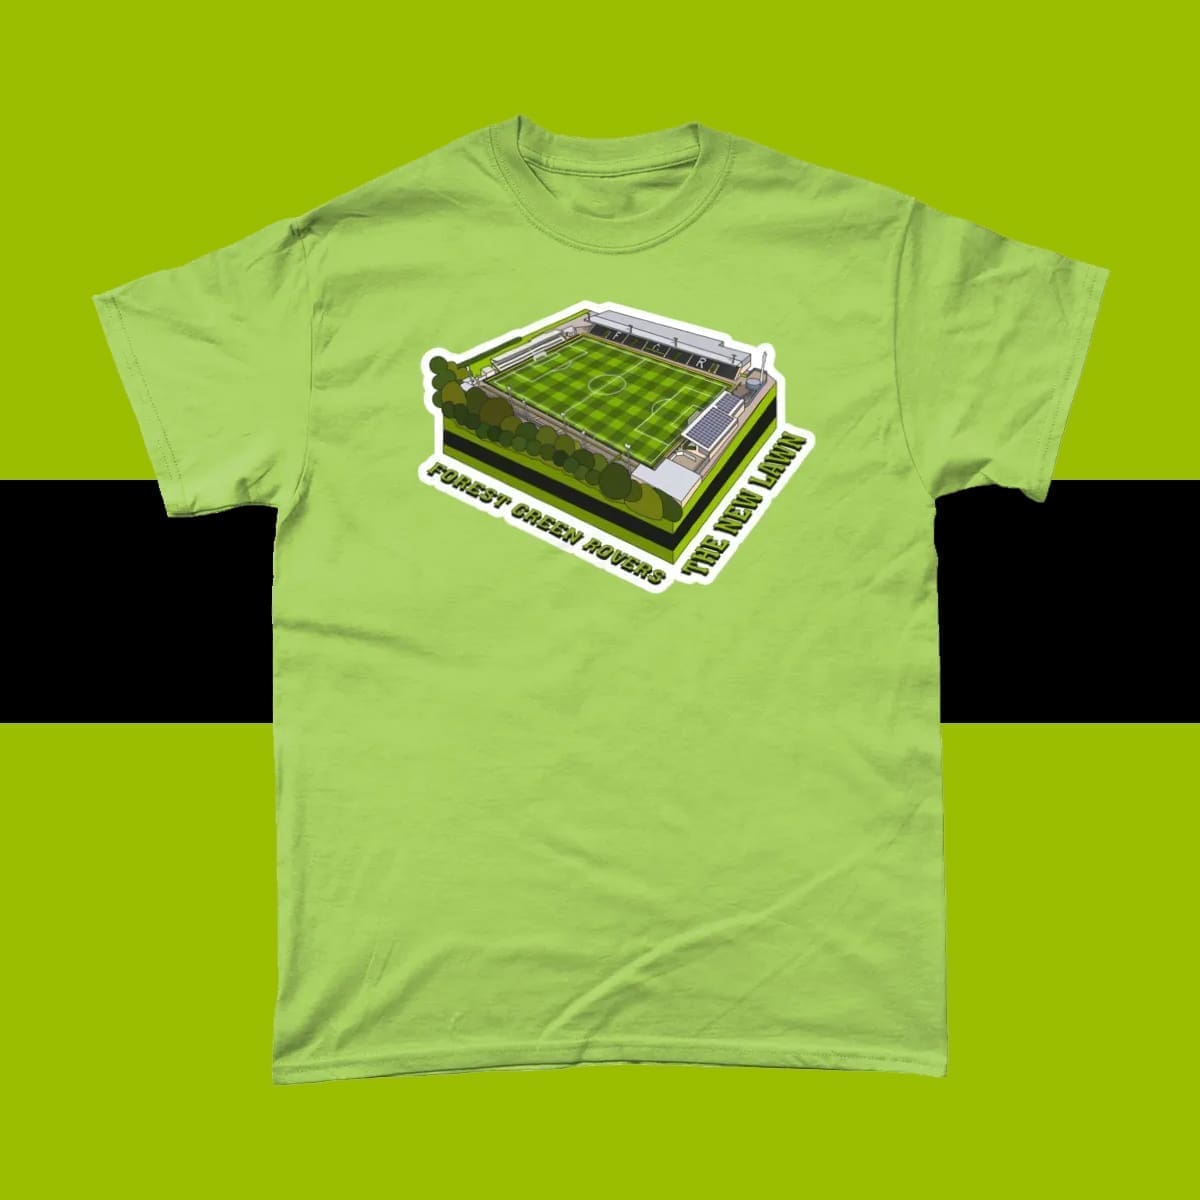 Forest Green Rovers The New Lawn Football Stadium T Shirt